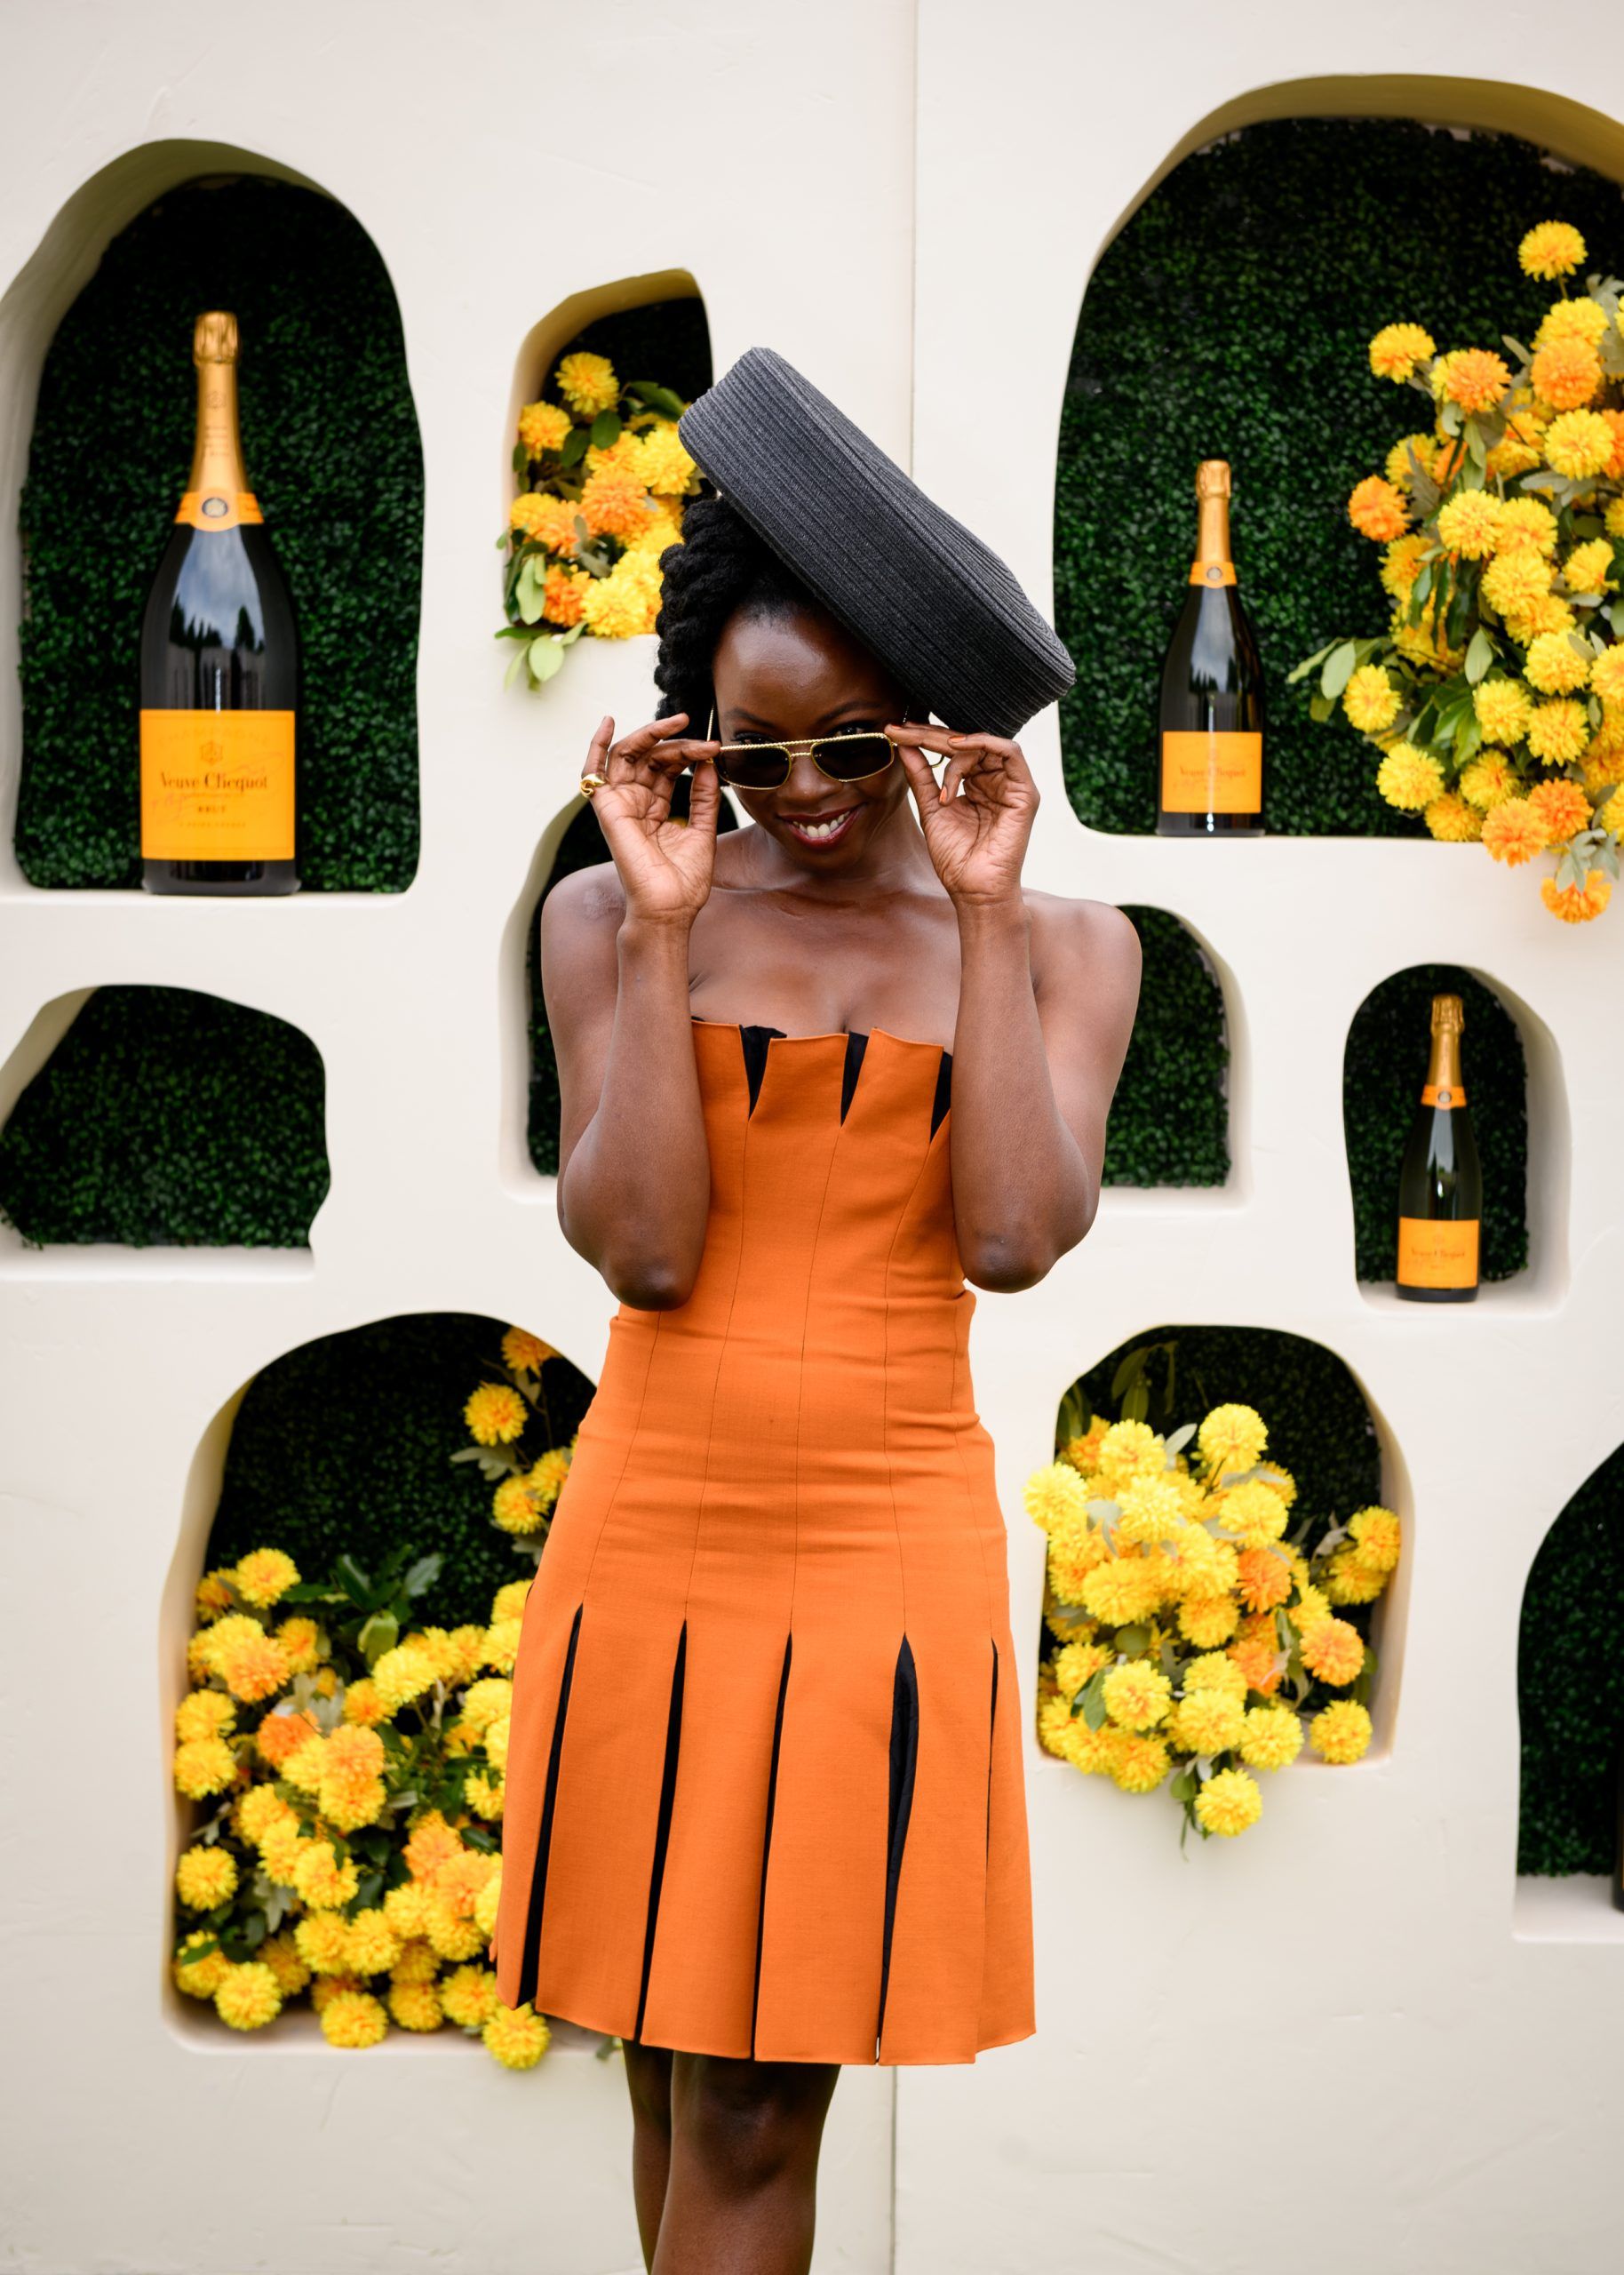 VEUVE CLICQUOT  Check out this interview with Veuve Clicquot